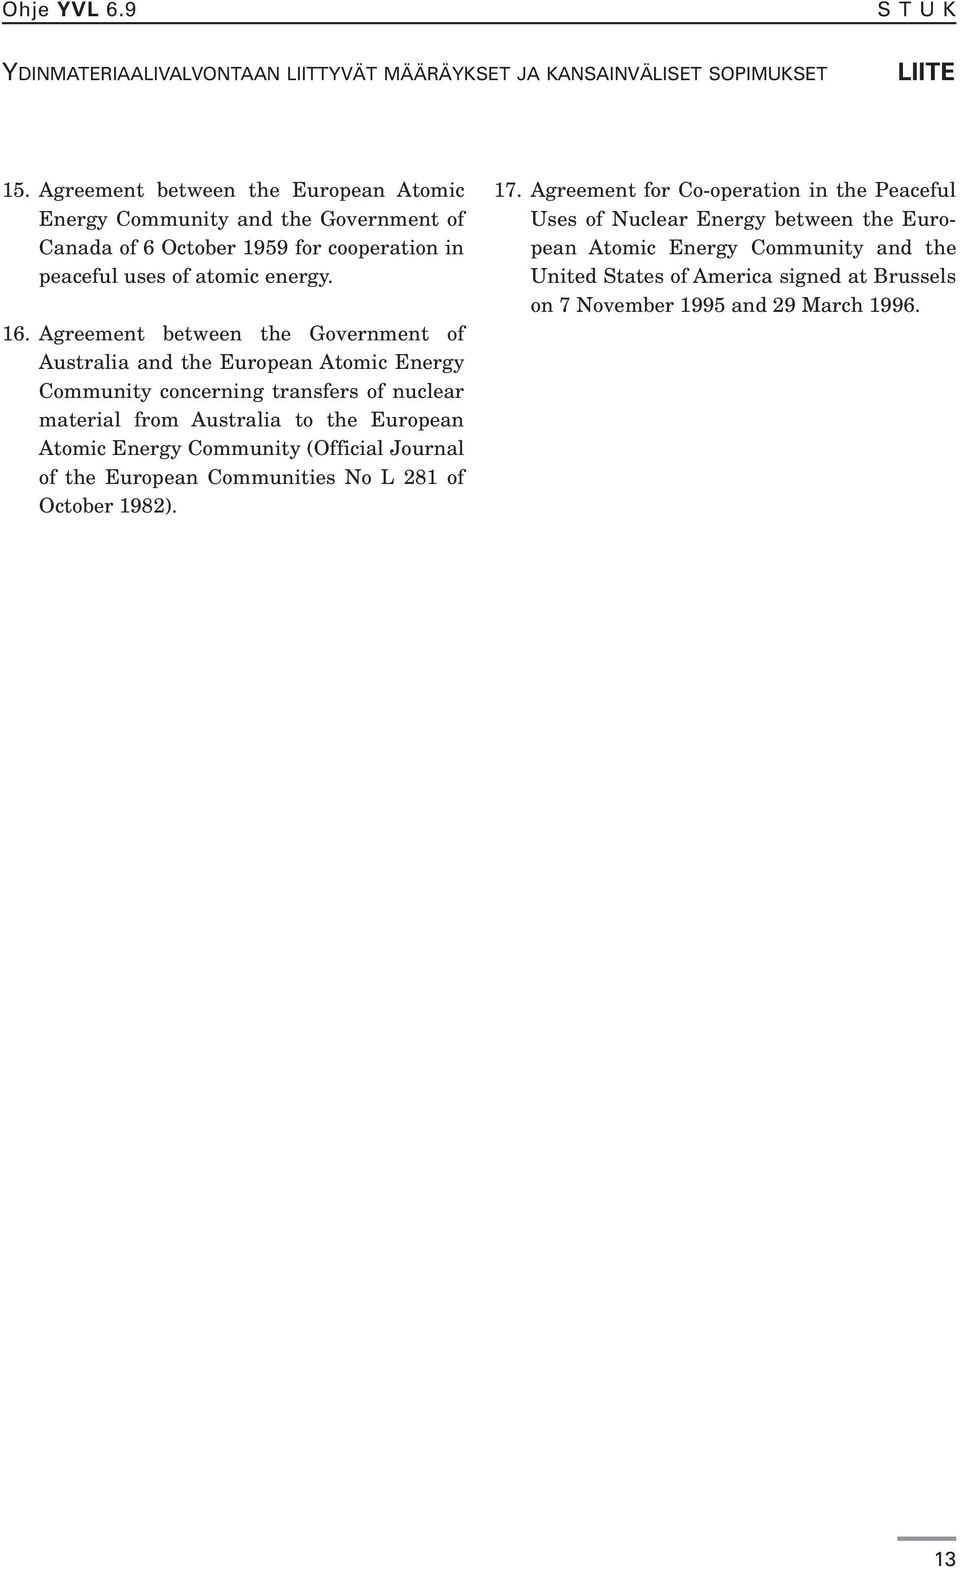 Agreement between the Government of Australia and the European Atomic Energy Community concerning transfers of nuclear material from Australia to the European Atomic Energy